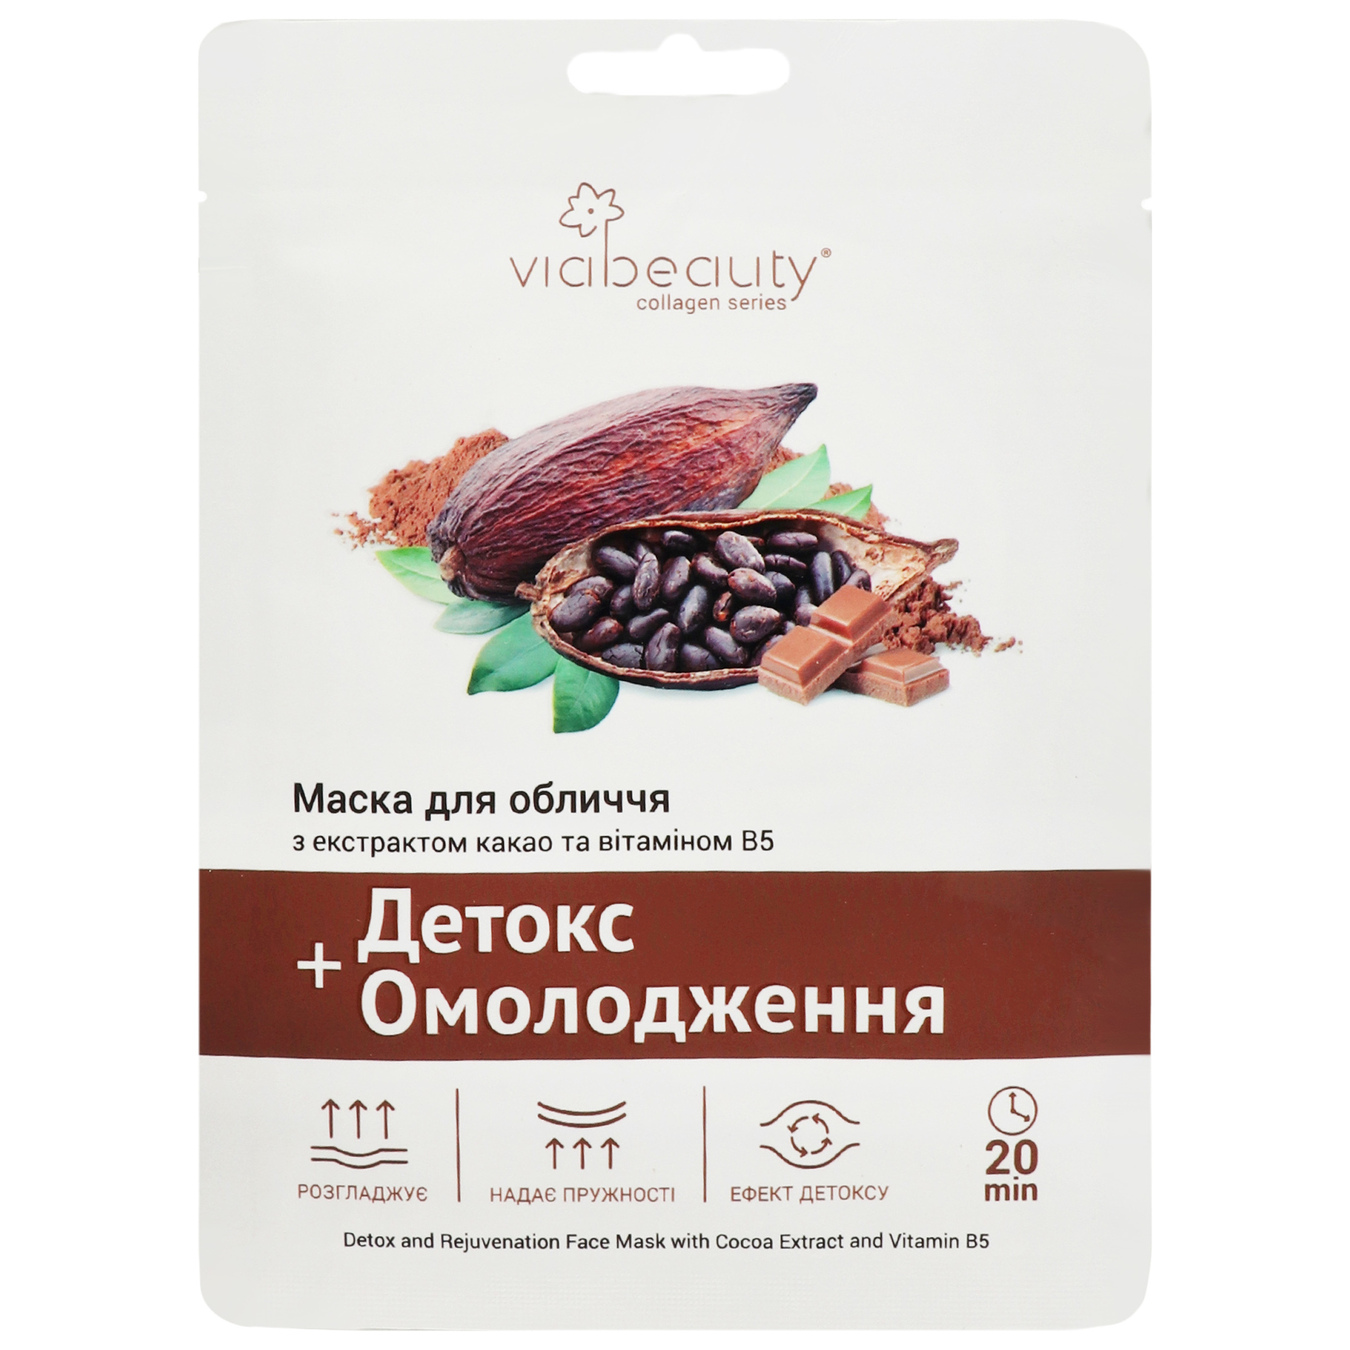 ViaBeauty fabric face mask with cocoa extract and vitamin B5 detox and rejuvenation